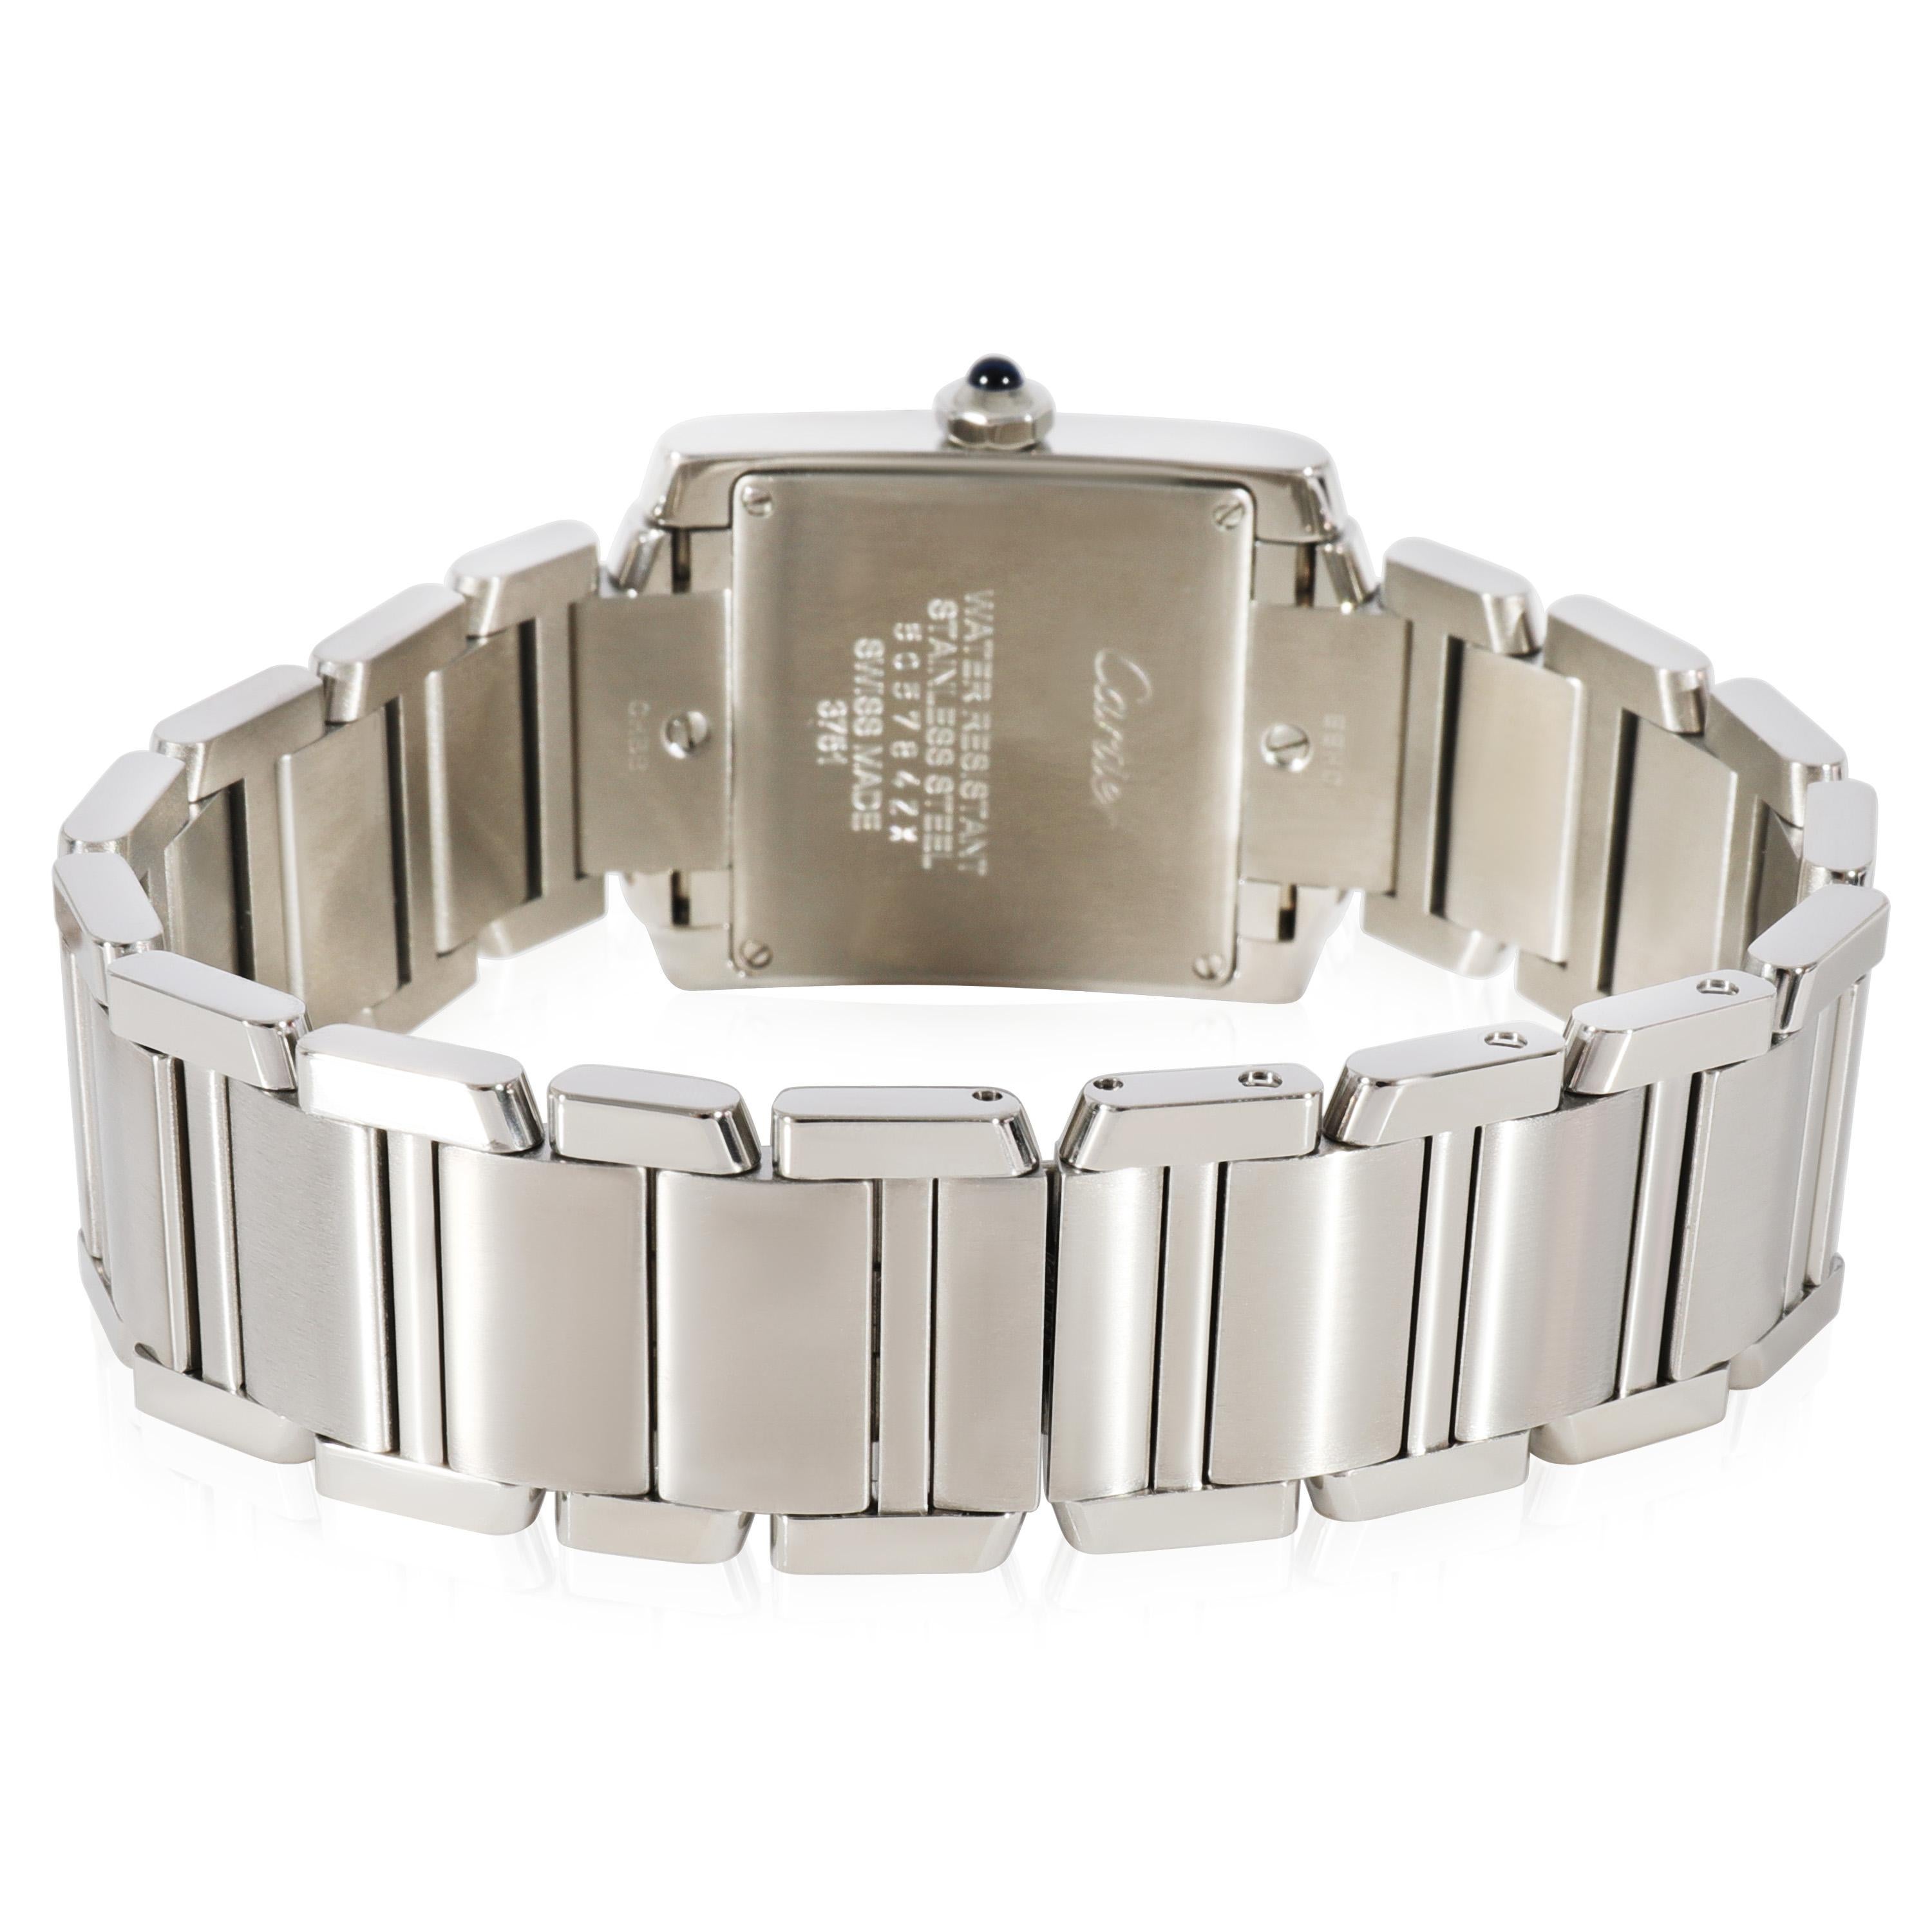 Cartier Tank Francaise W4TA0009 Unisex Watch in  Stainless Steel

SKU: 124857

PRIMARY DETAILS
Brand: Cartier
Model: Tank Francaise
Country of Origin: Switzerland
Movement Type: Quartz: Battery
Year of Manufacture: 2020-2029
Condition: Retail price